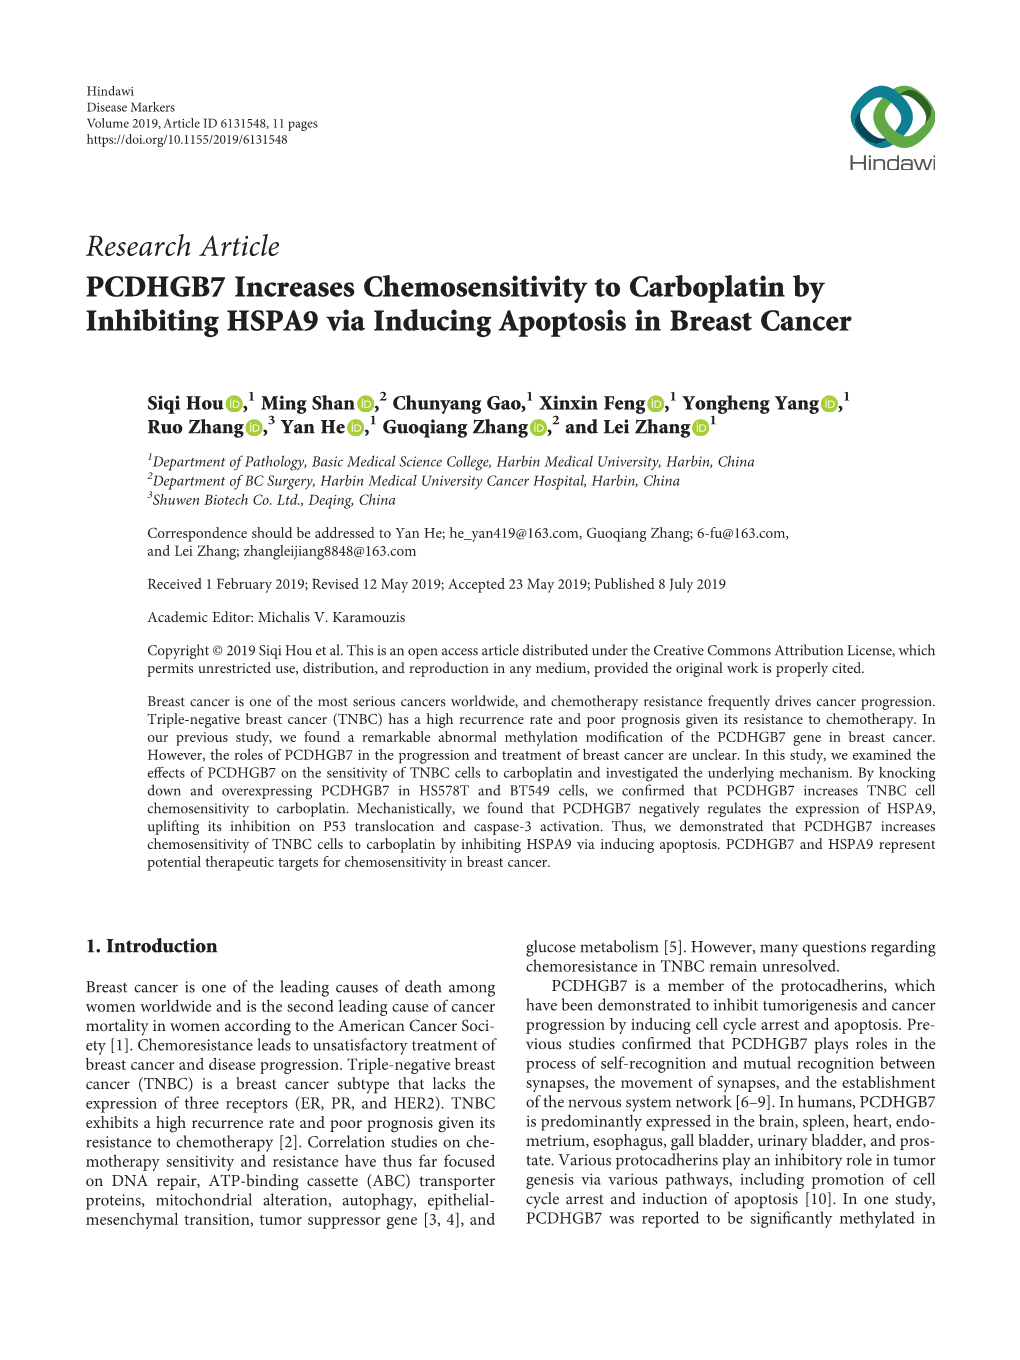 Research Article PCDHGB7 Increases Chemosensitivity to Carboplatin by Inhibiting HSPA9 Via Inducing Apoptosis in Breast Cancer